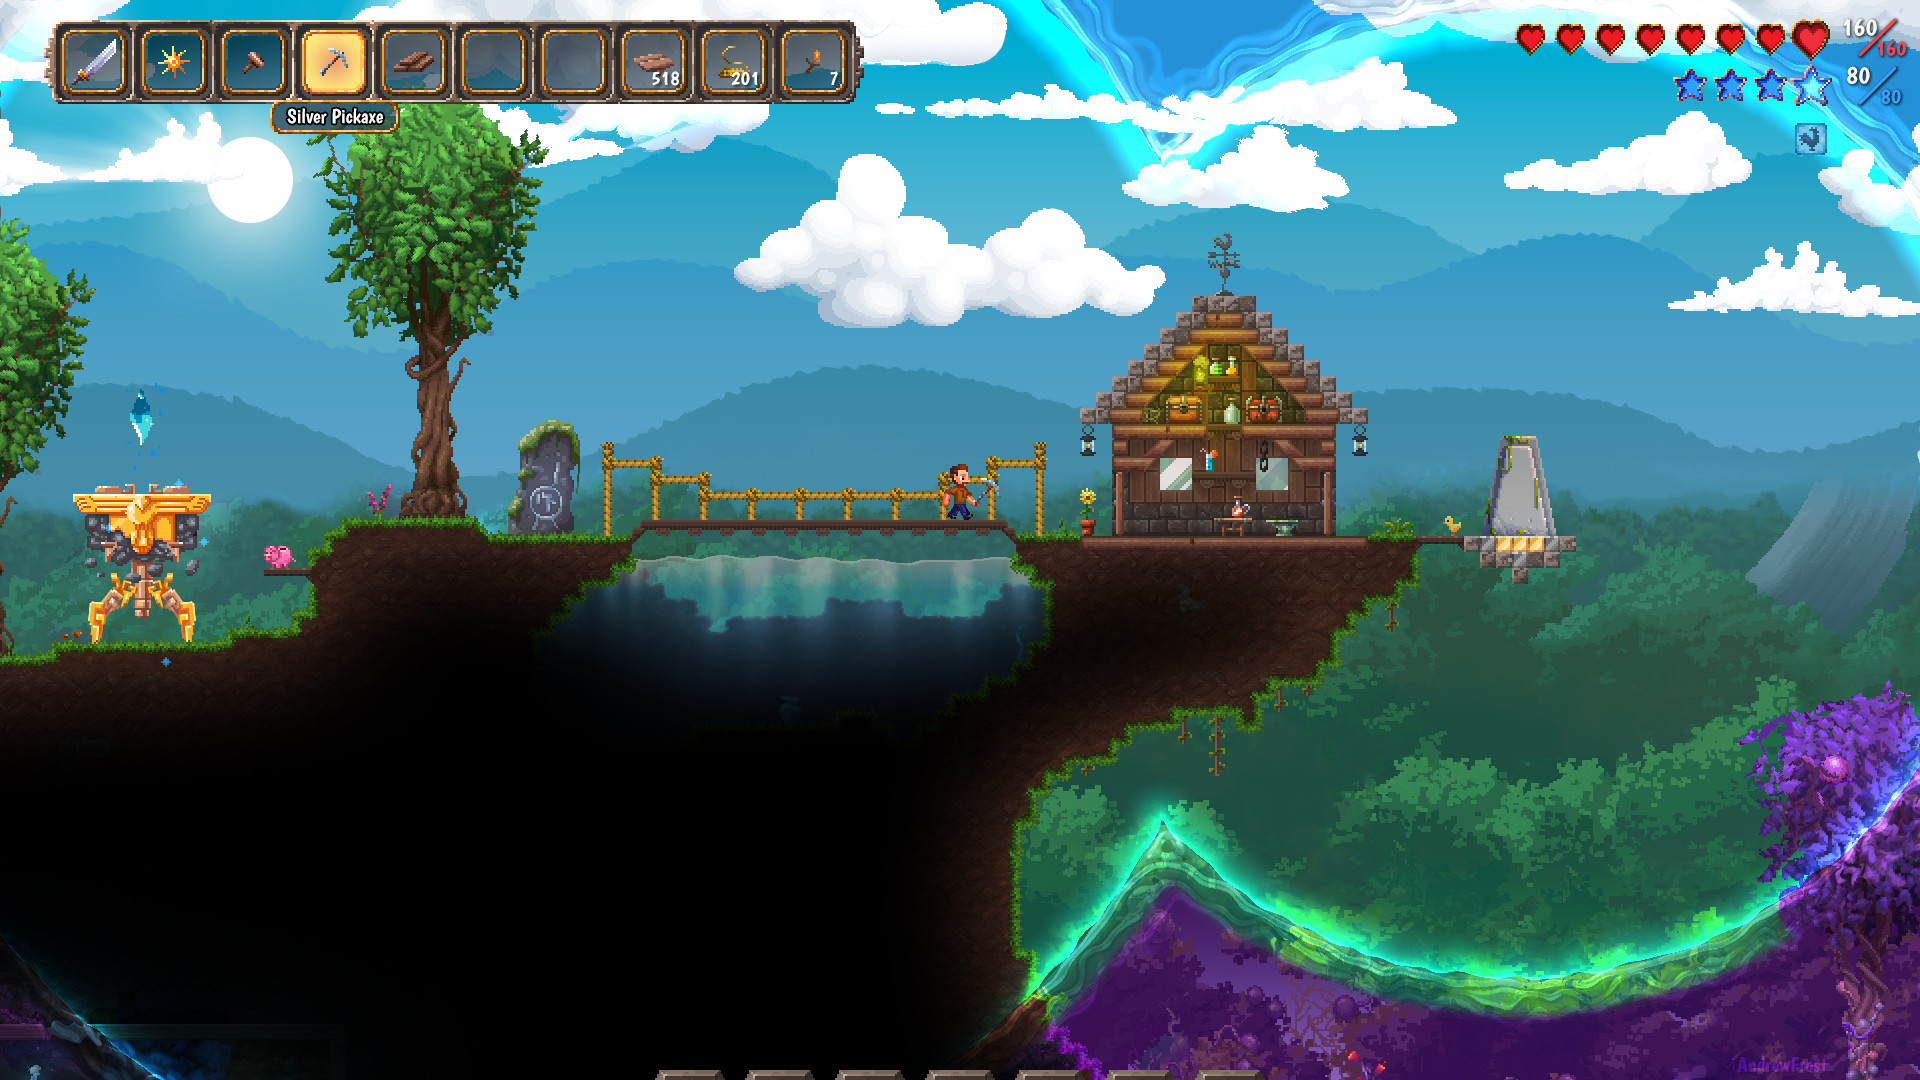 1920x1080 ... Terraria Otherworld Cliff by ds51-A